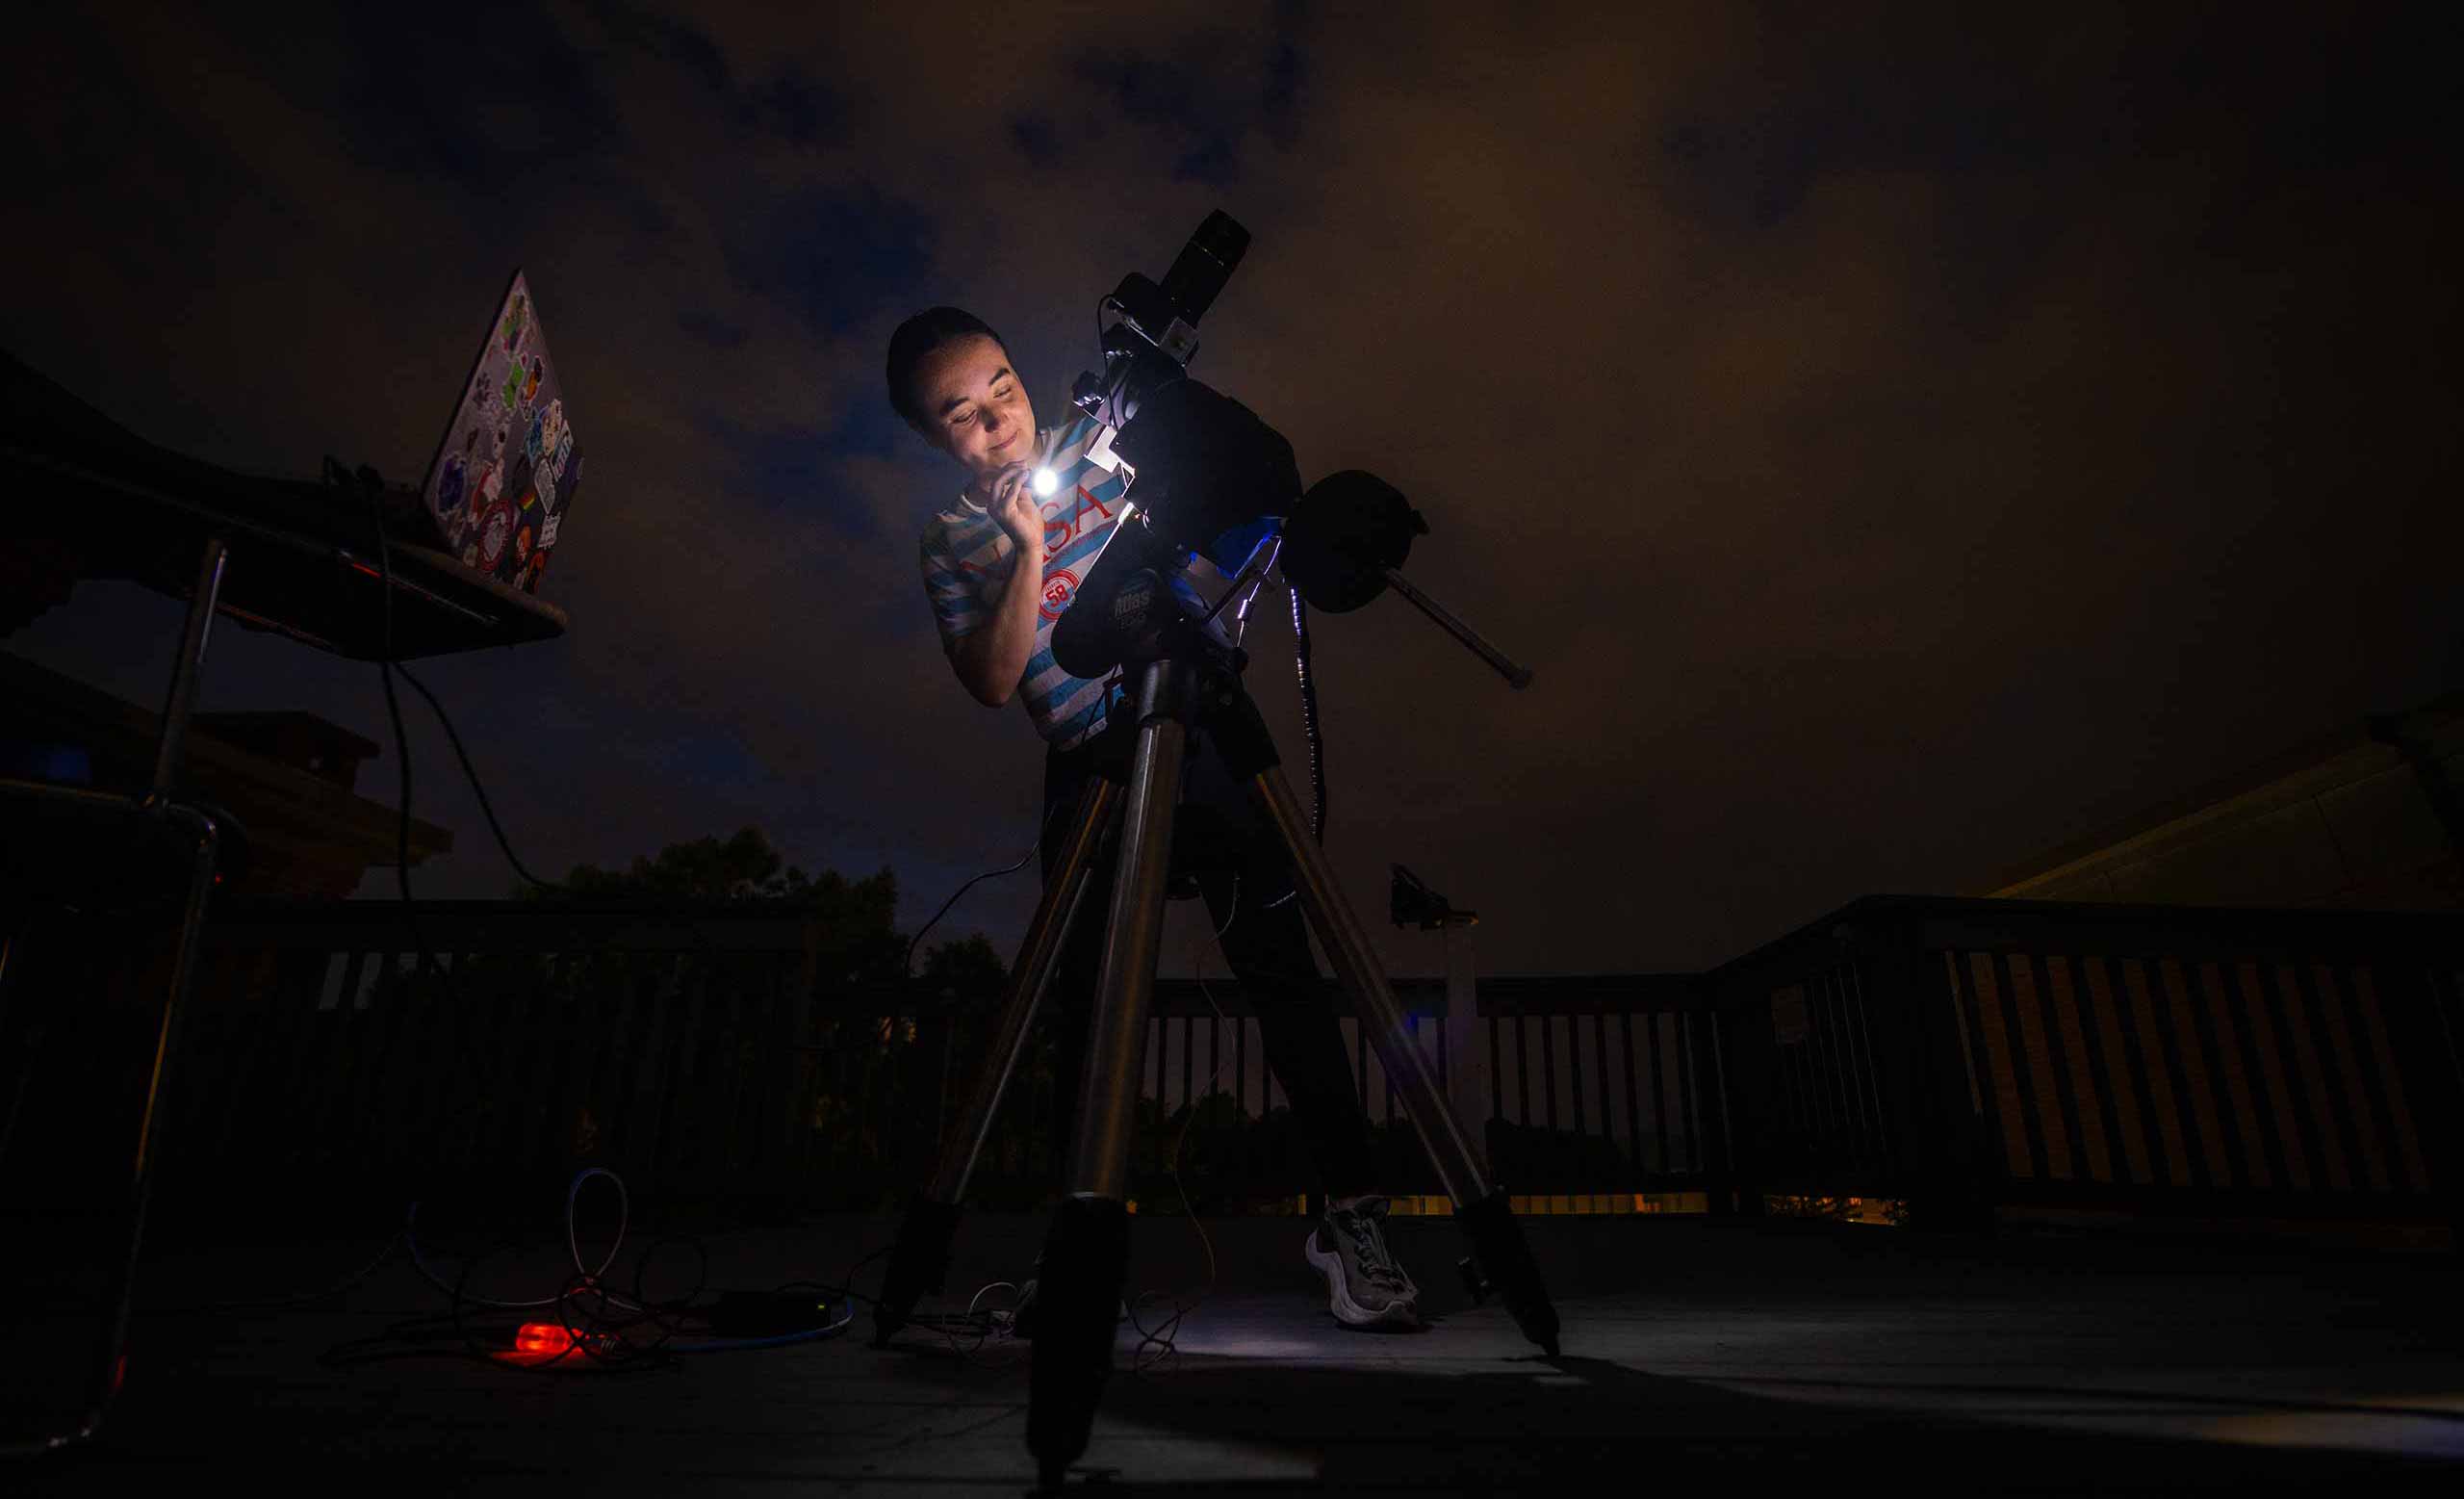 Rosa Newshare explores astrophotography at night on top of the math and physics building.